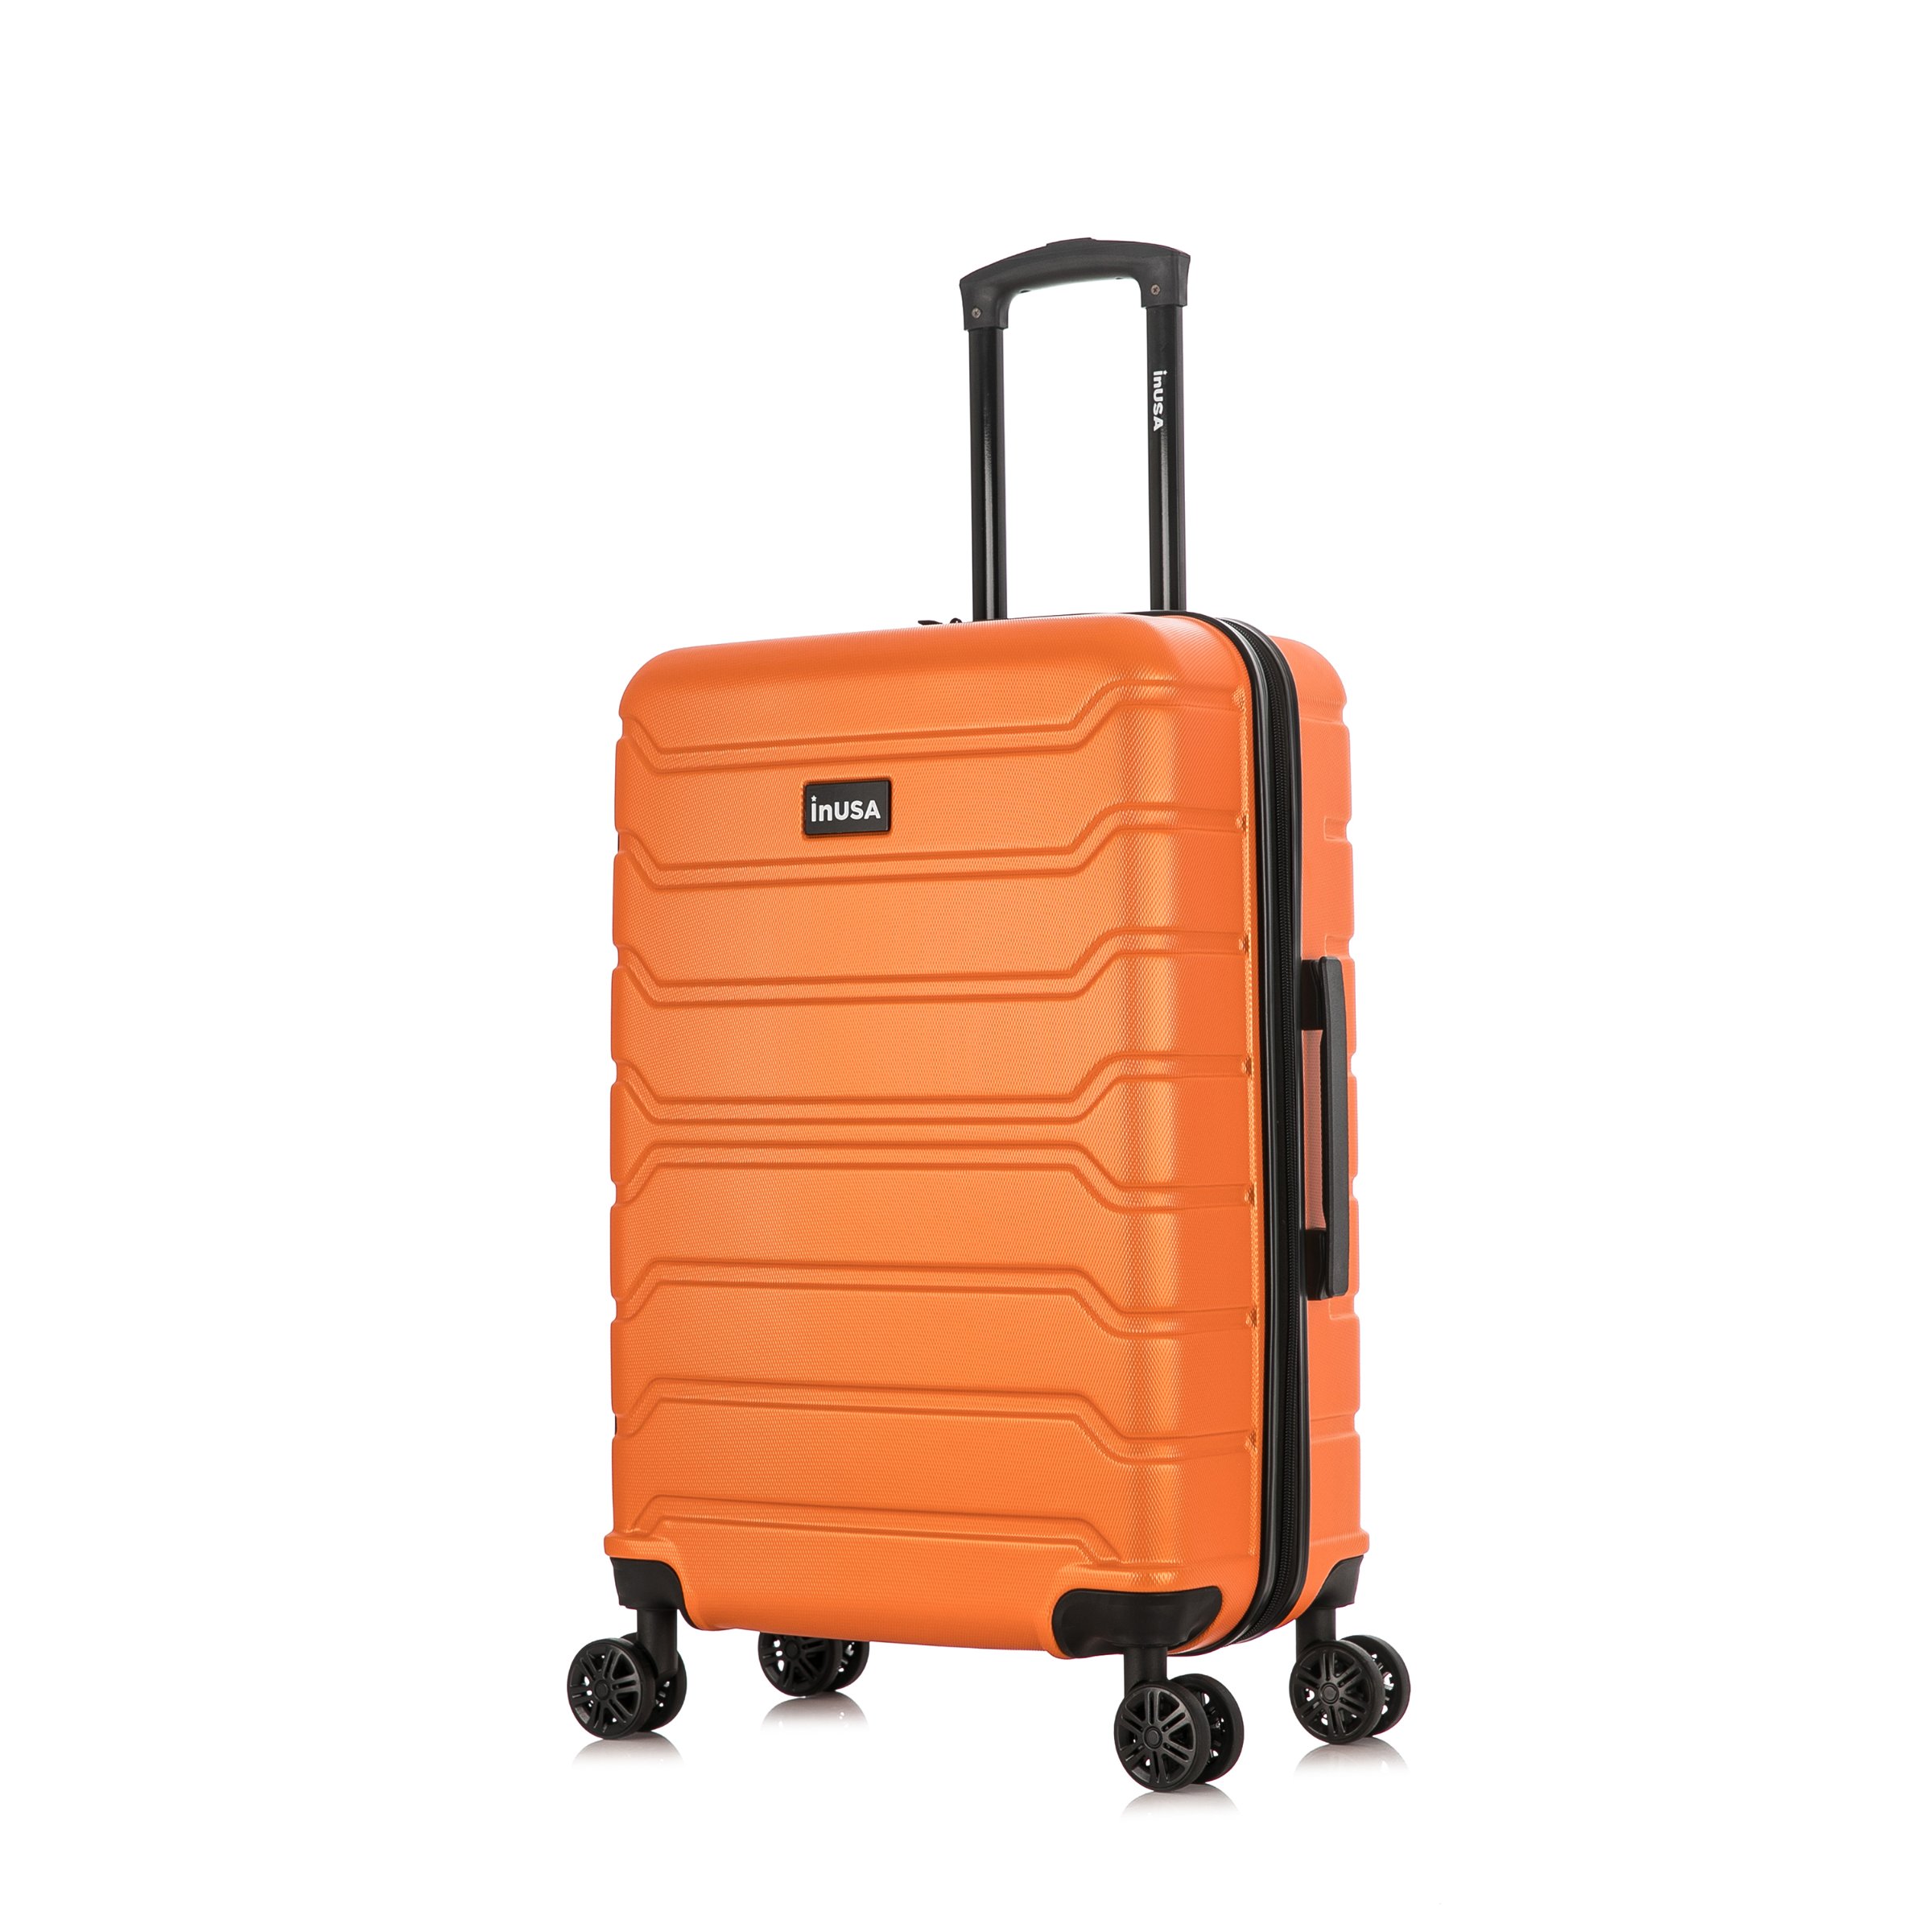 InUSA Trend 24" Hardside Lightweight Luggage with Spinner Wheels, Handle, and Trolley, Orange - image 1 of 12